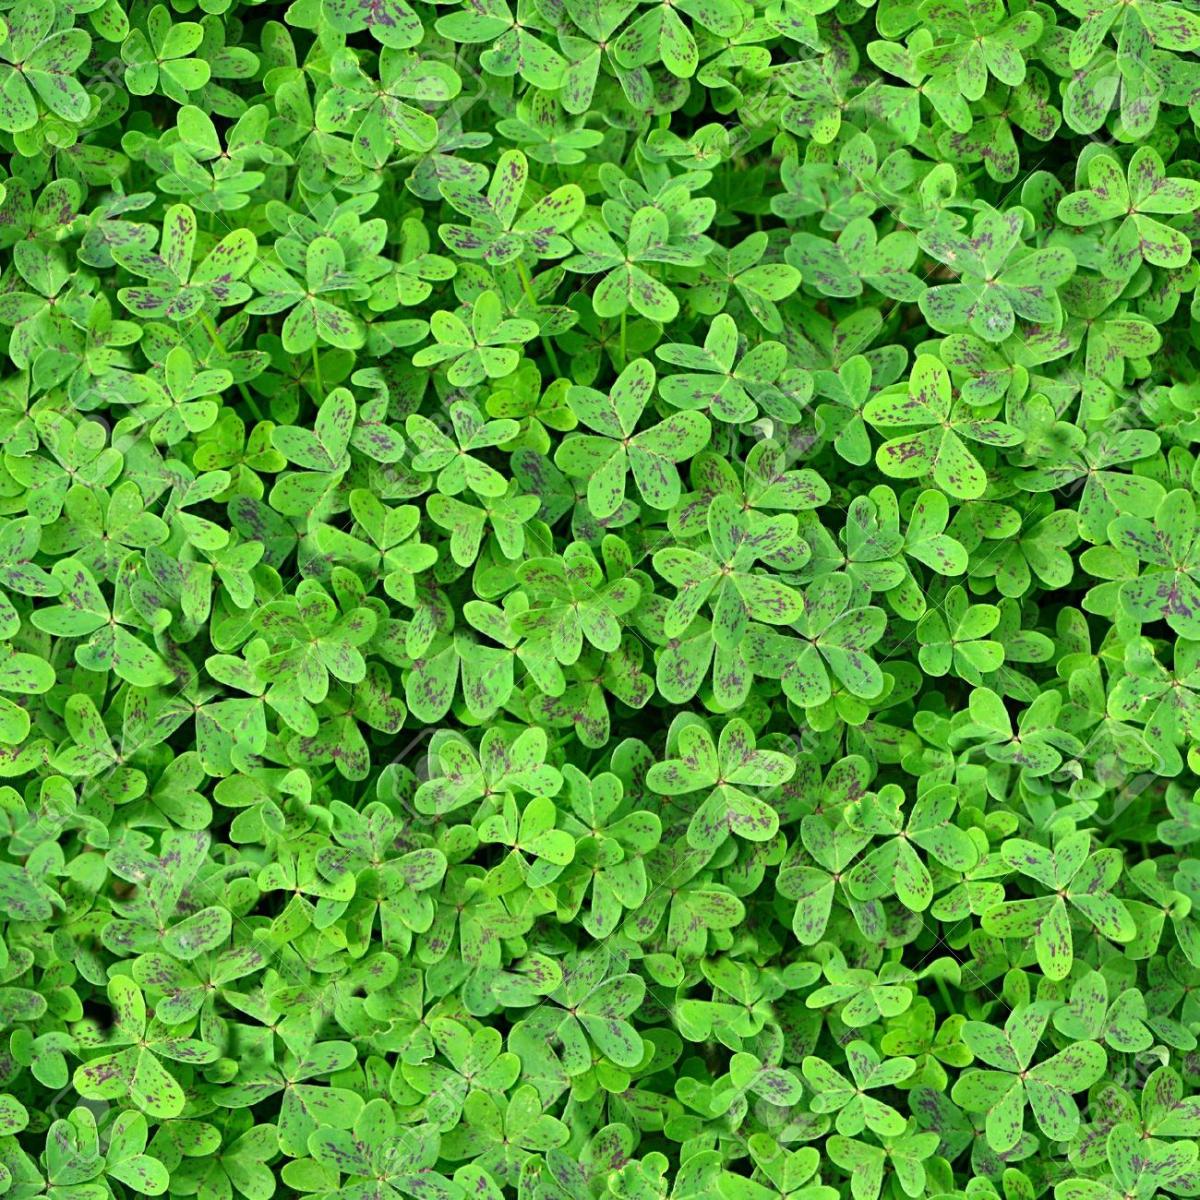 Ground cover with leaves